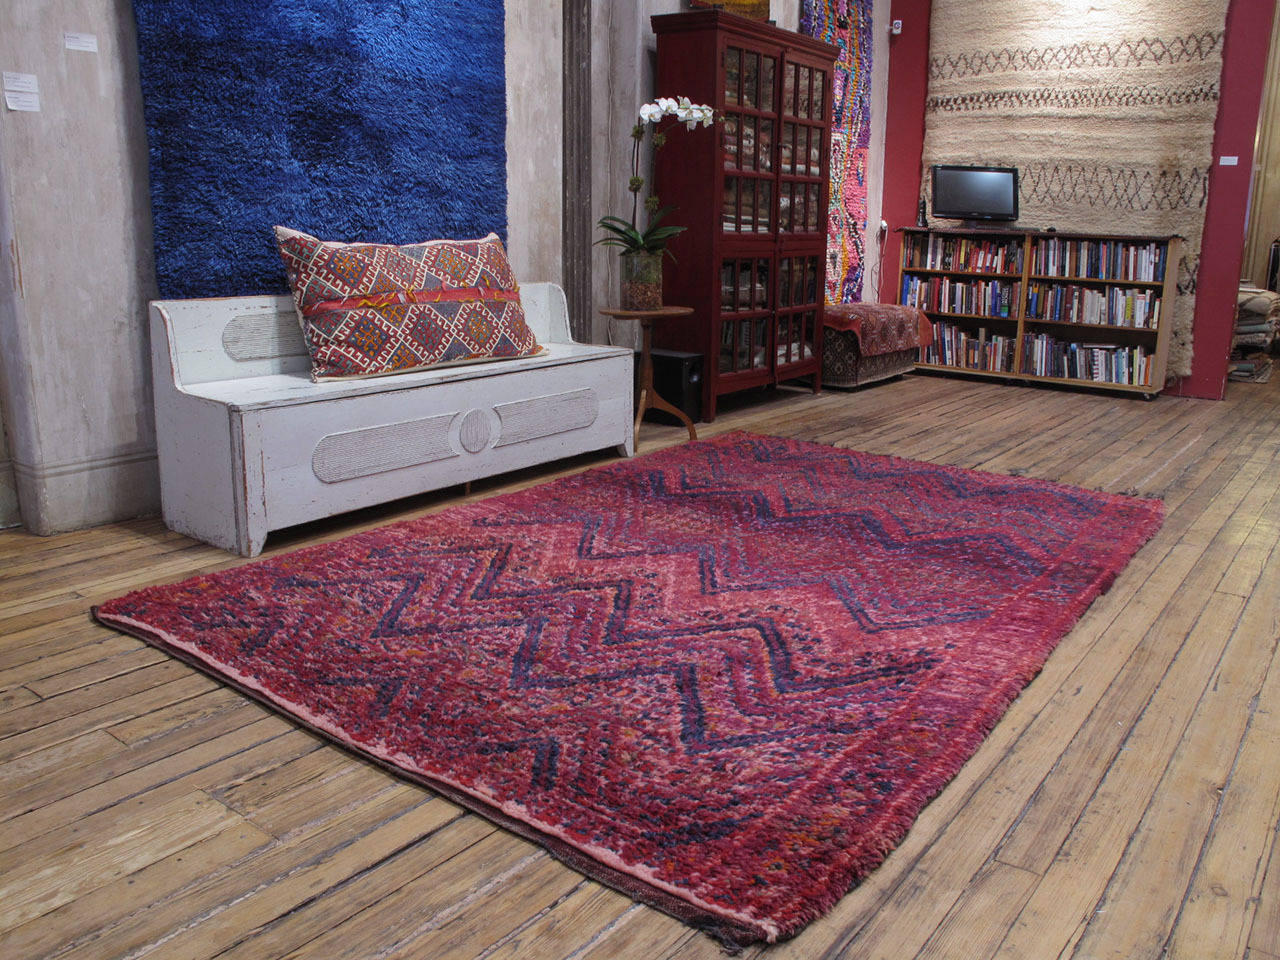 A fantastic Moroccan Berber carpet of unusually large proportions, attributed to the Beni Mguild tribal groups of the Central Middle Atlas Mountains. A very high quality example with very dense structure, high pile and in excellent state of